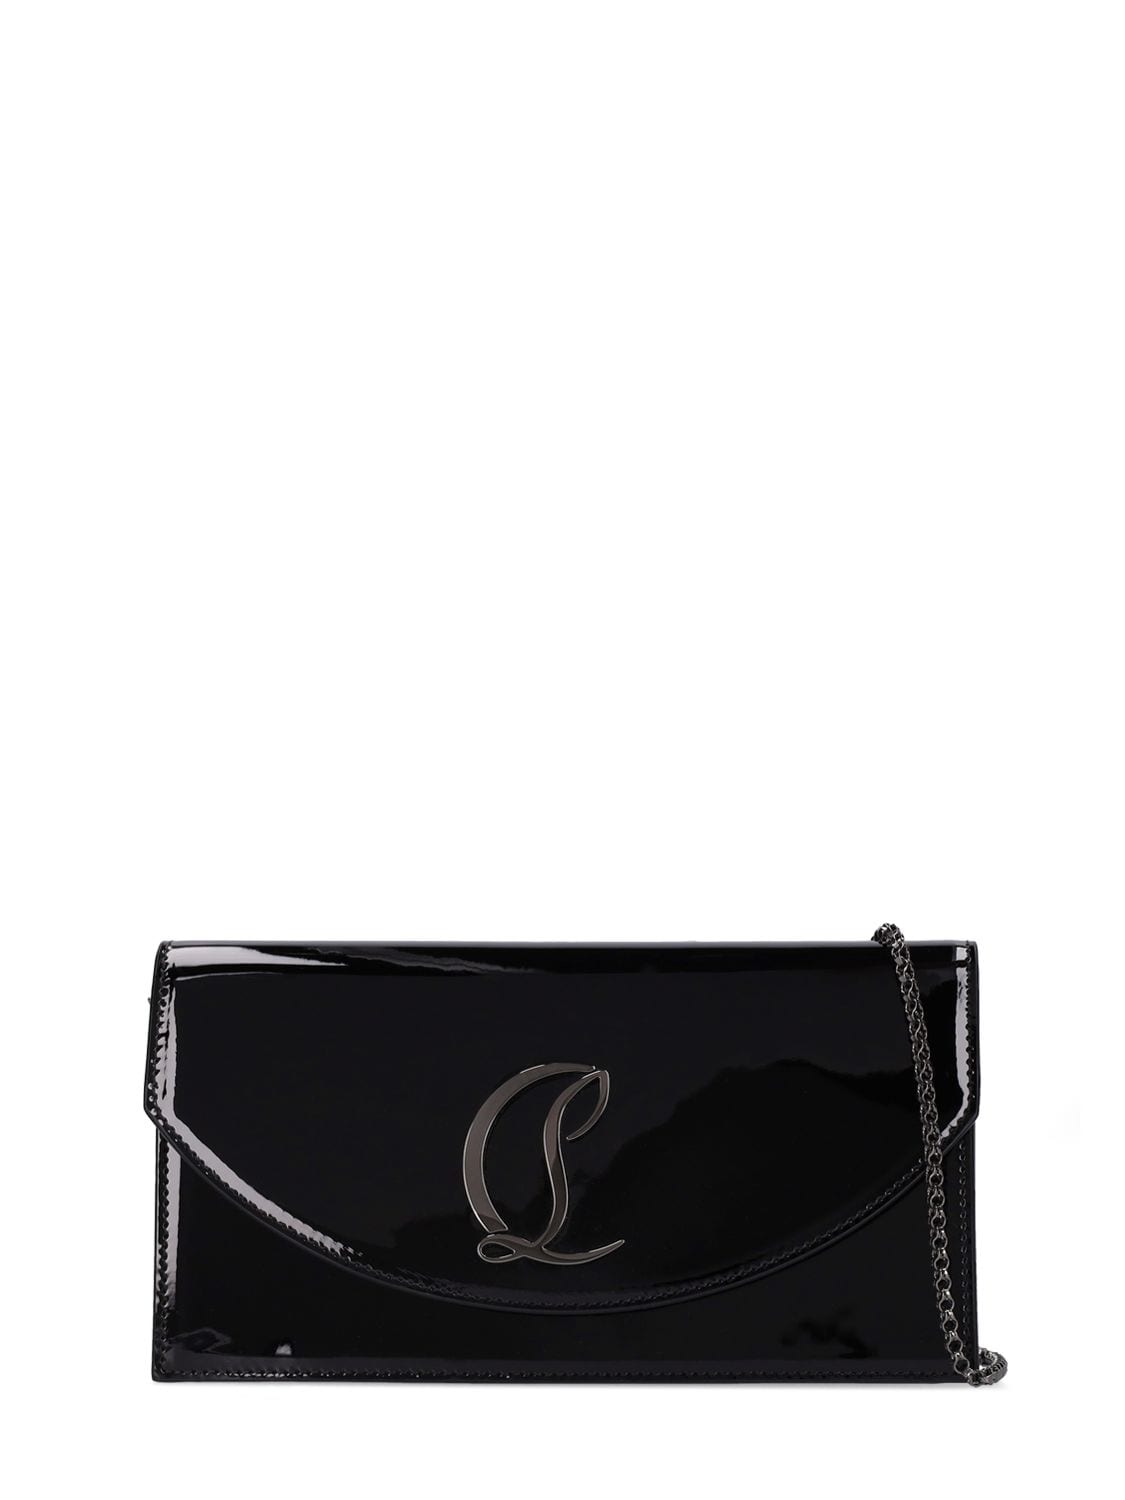 Christian Louboutin Small Logo Patent Leather Bag In Black